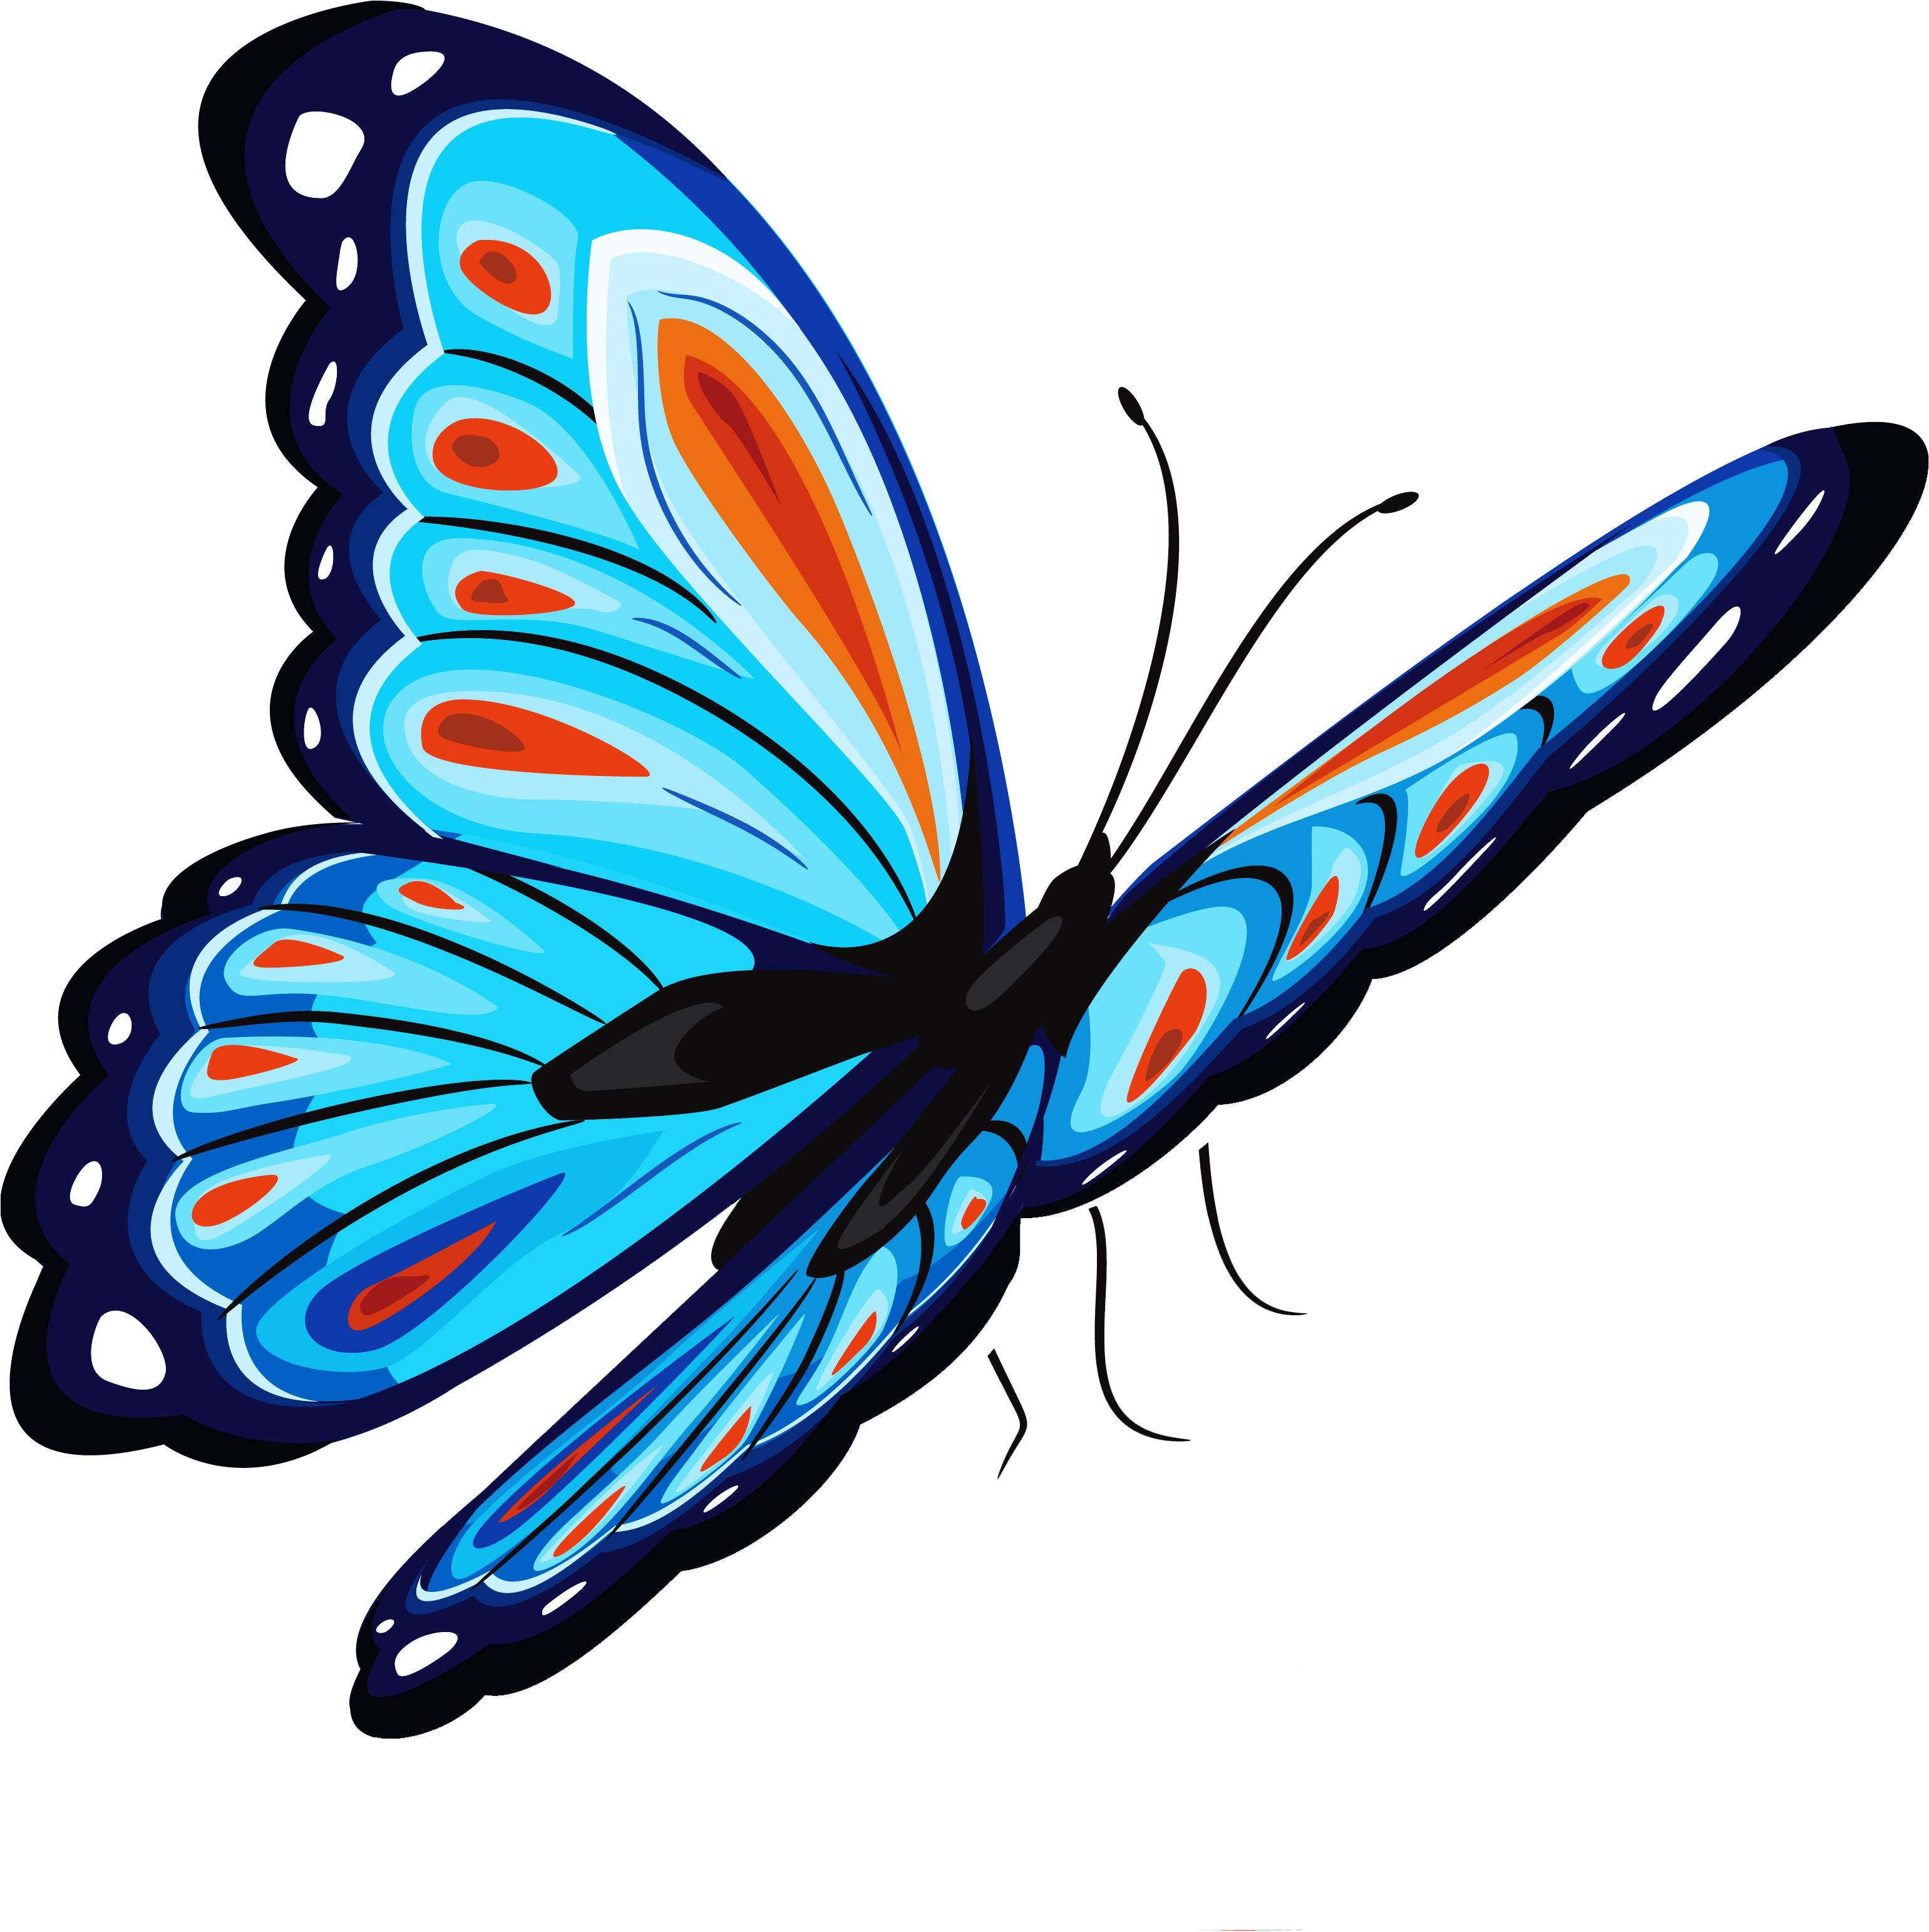 Vibrant Blue Butterfly Illustration PNG image